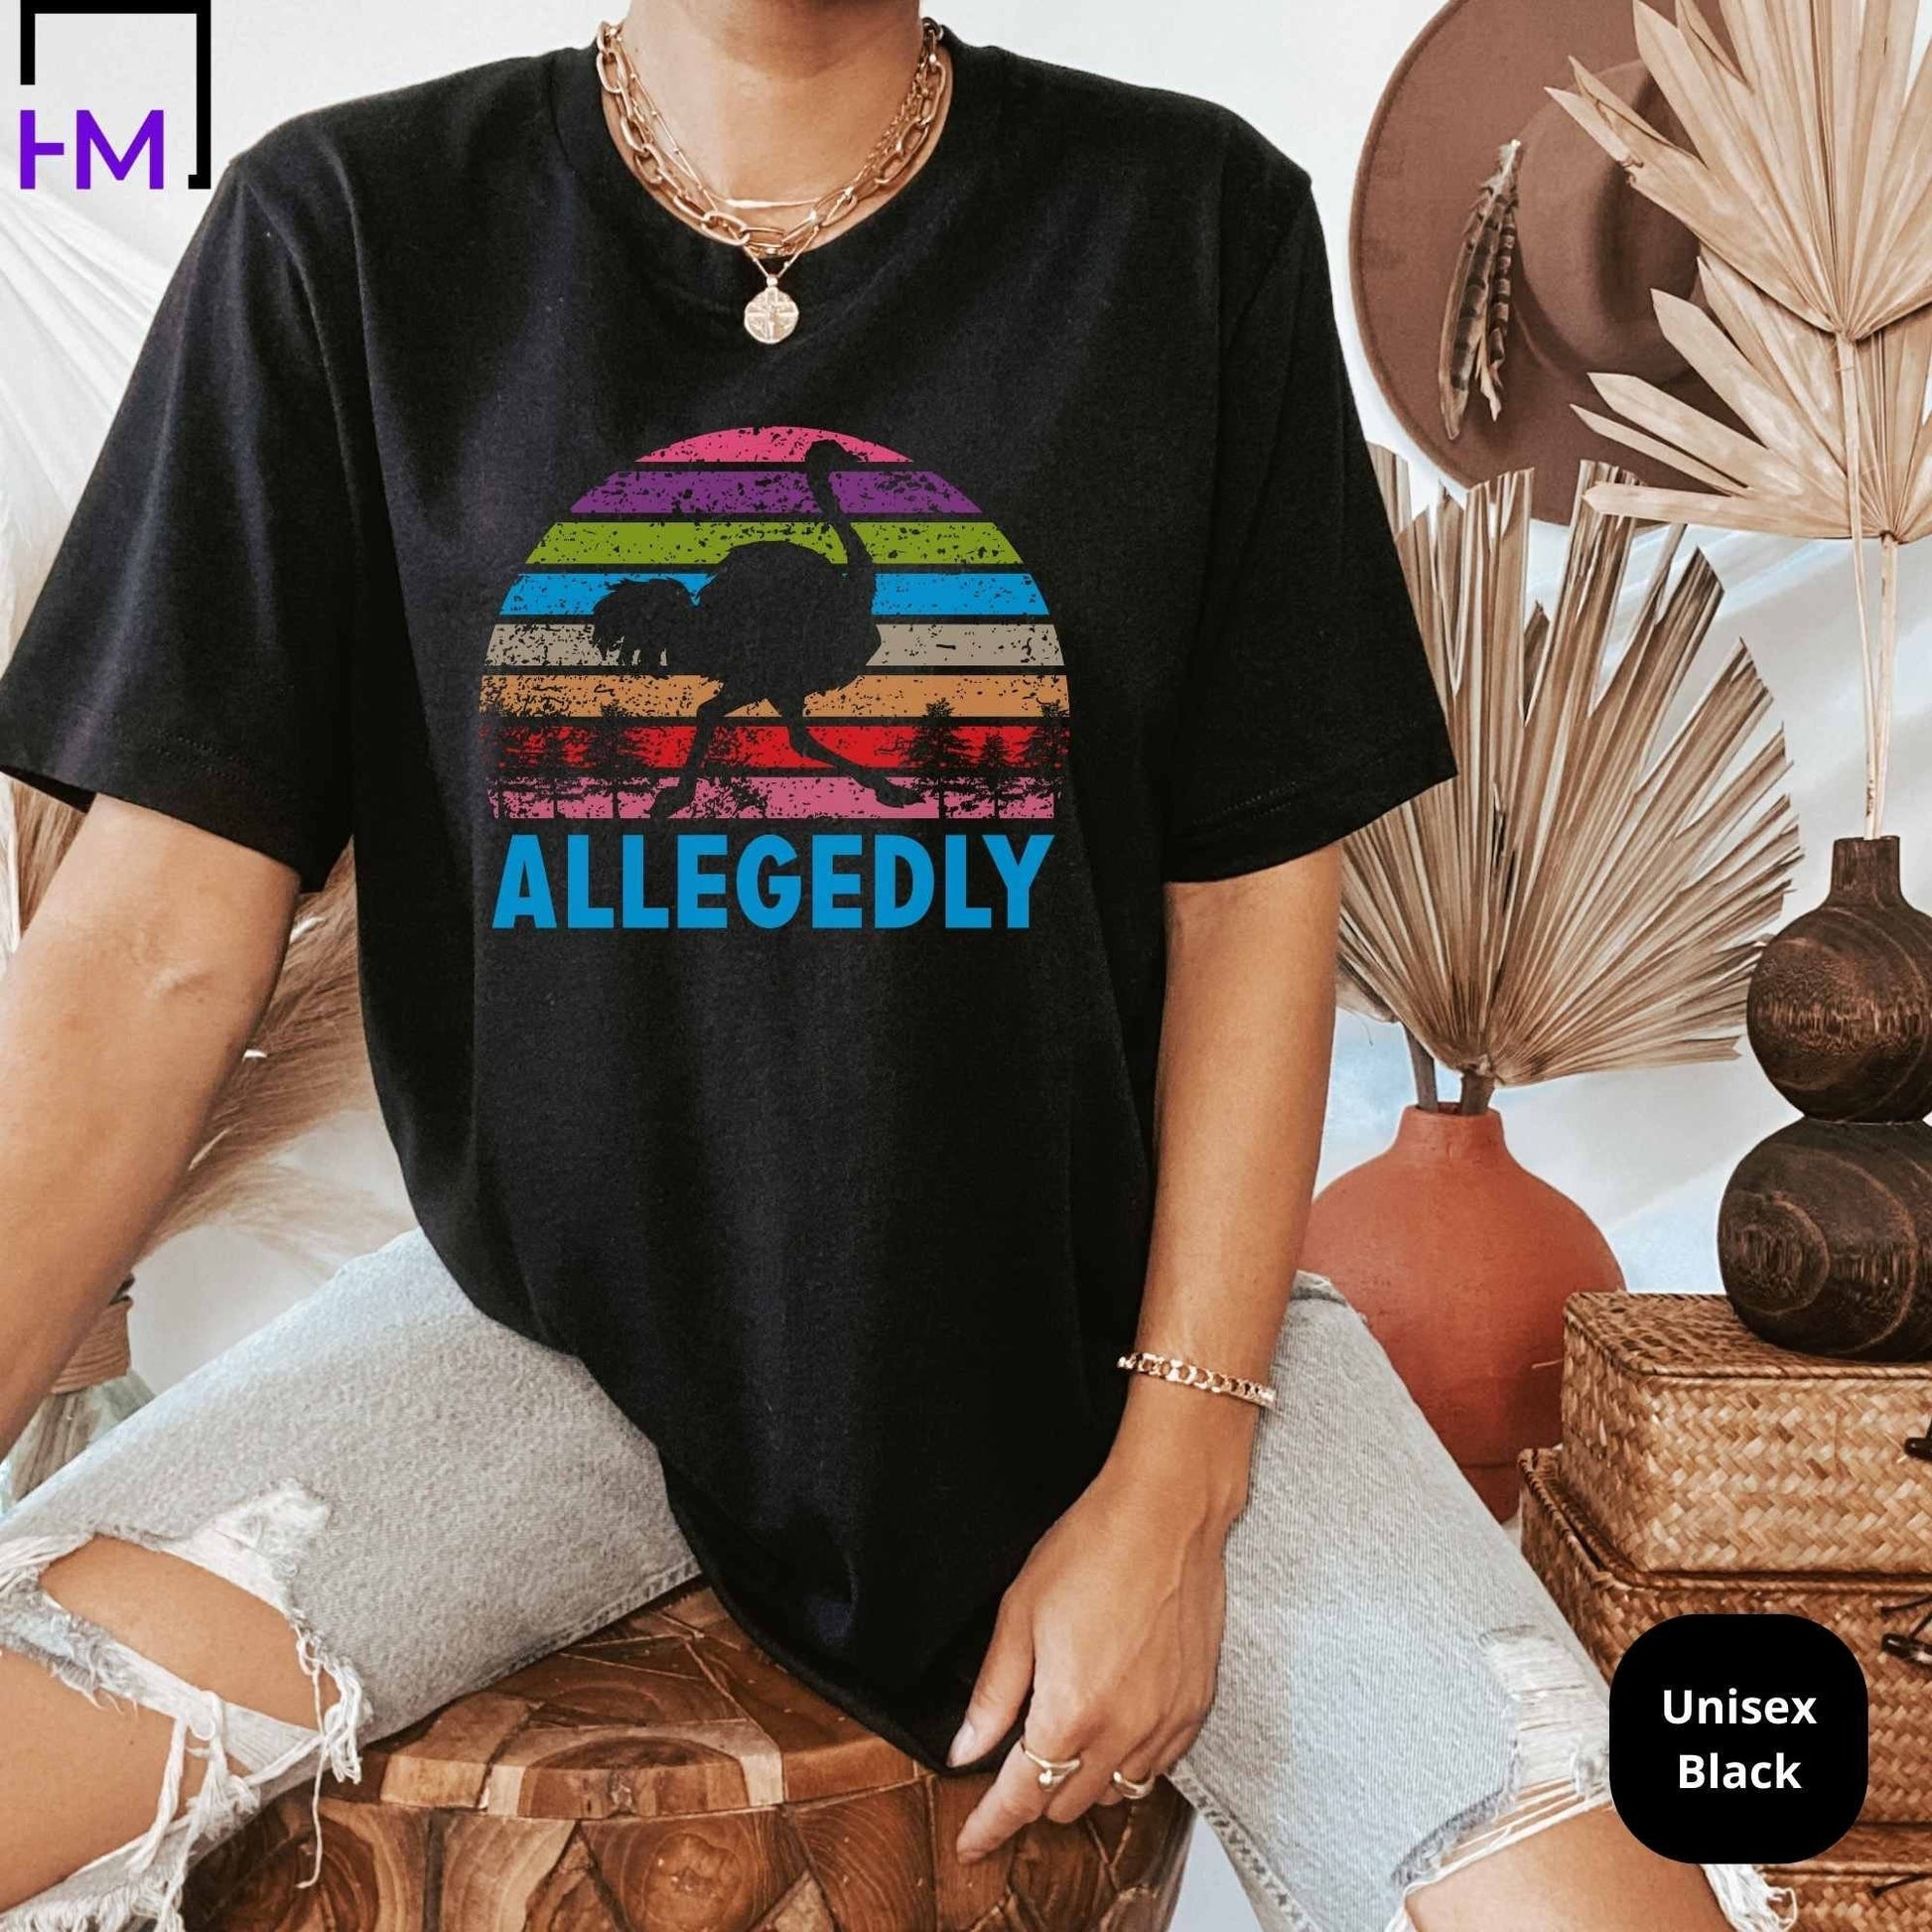 Allegedly Shirt, Allegedly Ostrich, Allegedly Black T-Shirt, Valentines Day Shirt, Gift for Valentines, Gift For Husband, Fathers Day Gift T HMDesignStudioUS